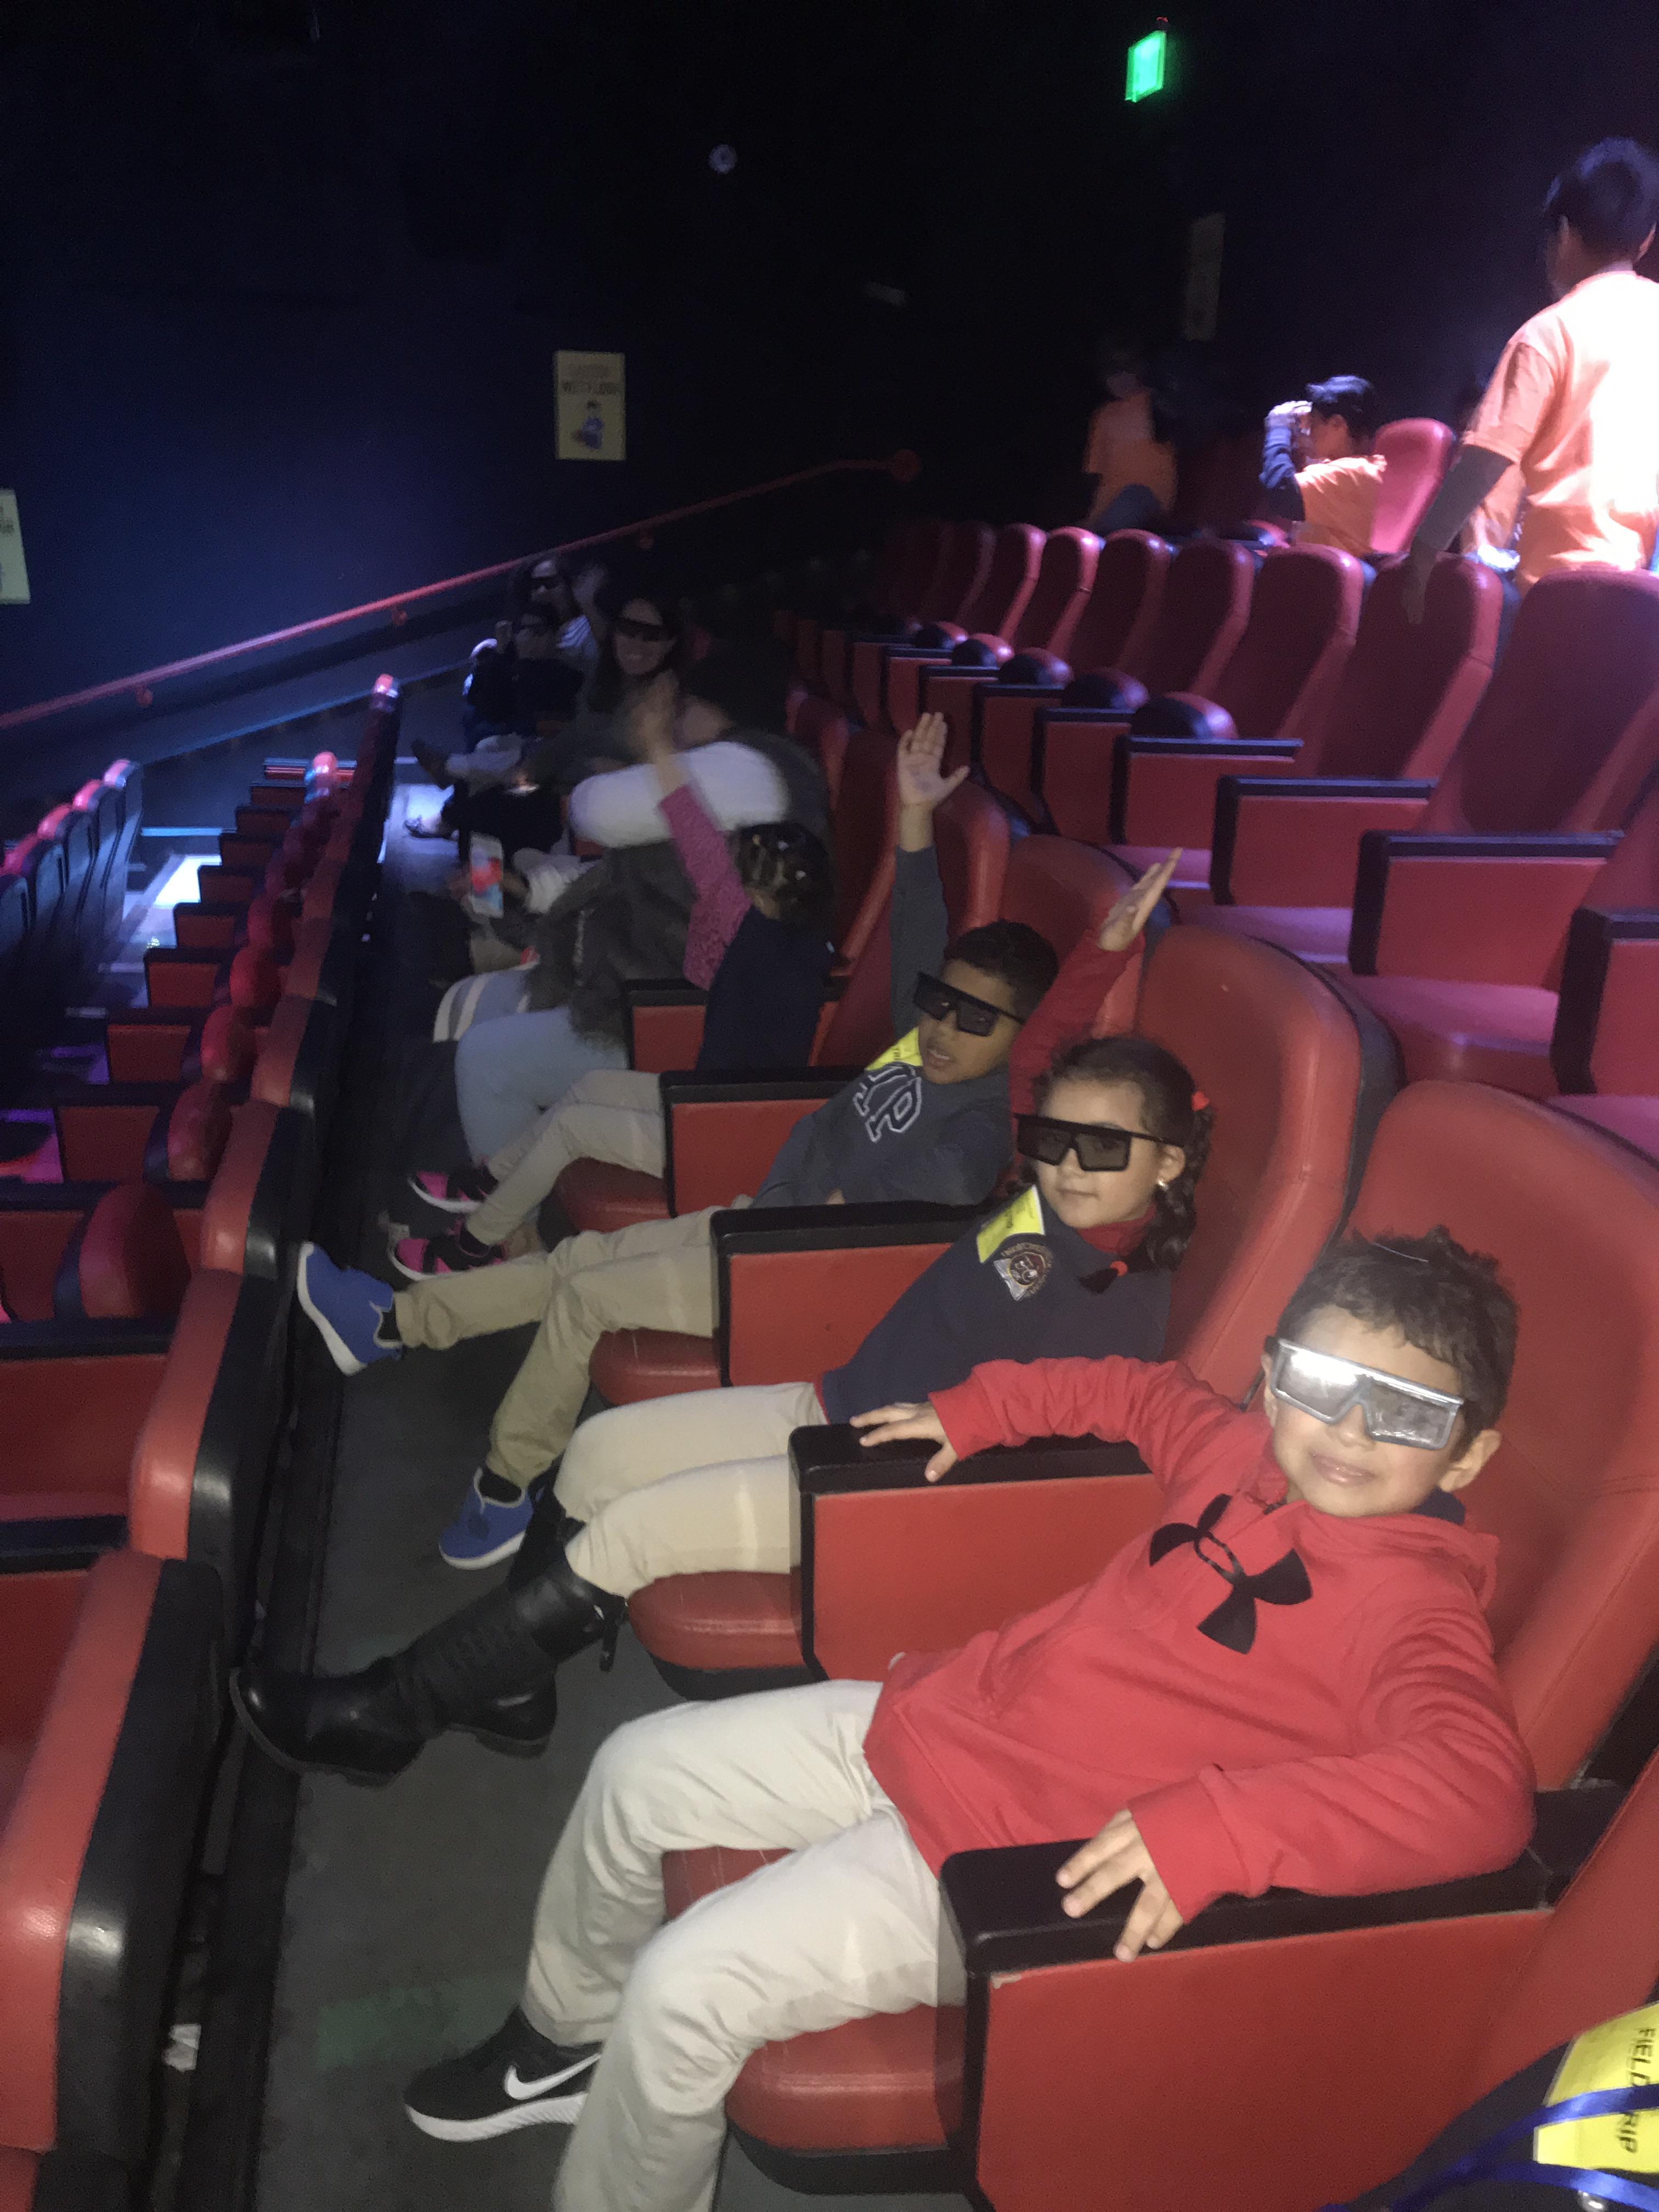 the students with 3d glasses in the theater smiling